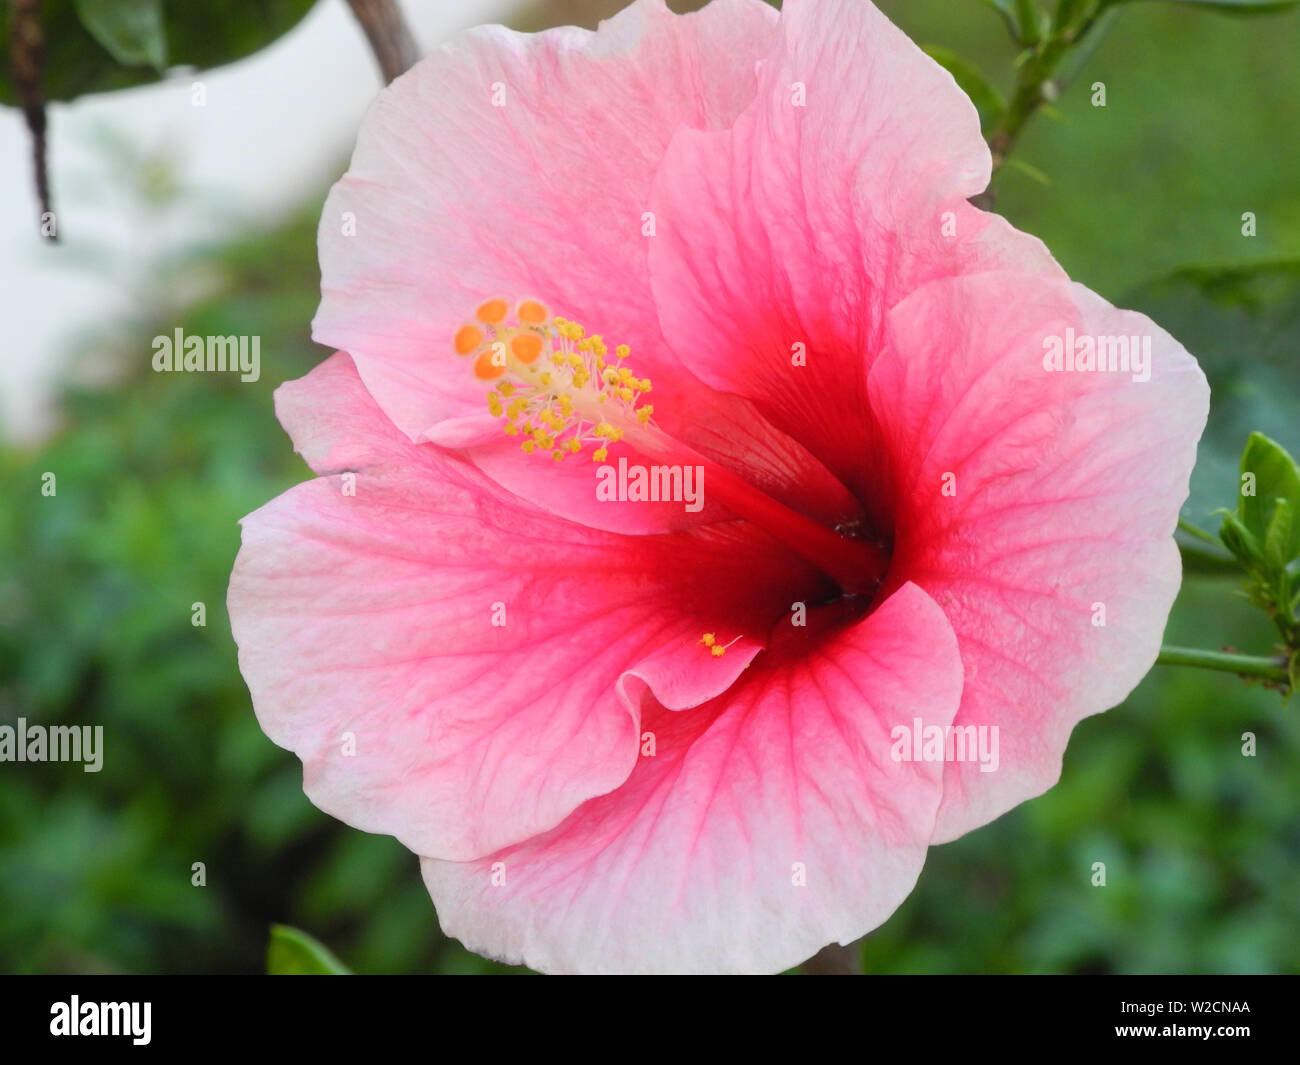 Tropical plant Hibiscus with rose color flowers, Kerala, Kochi Stock Photo